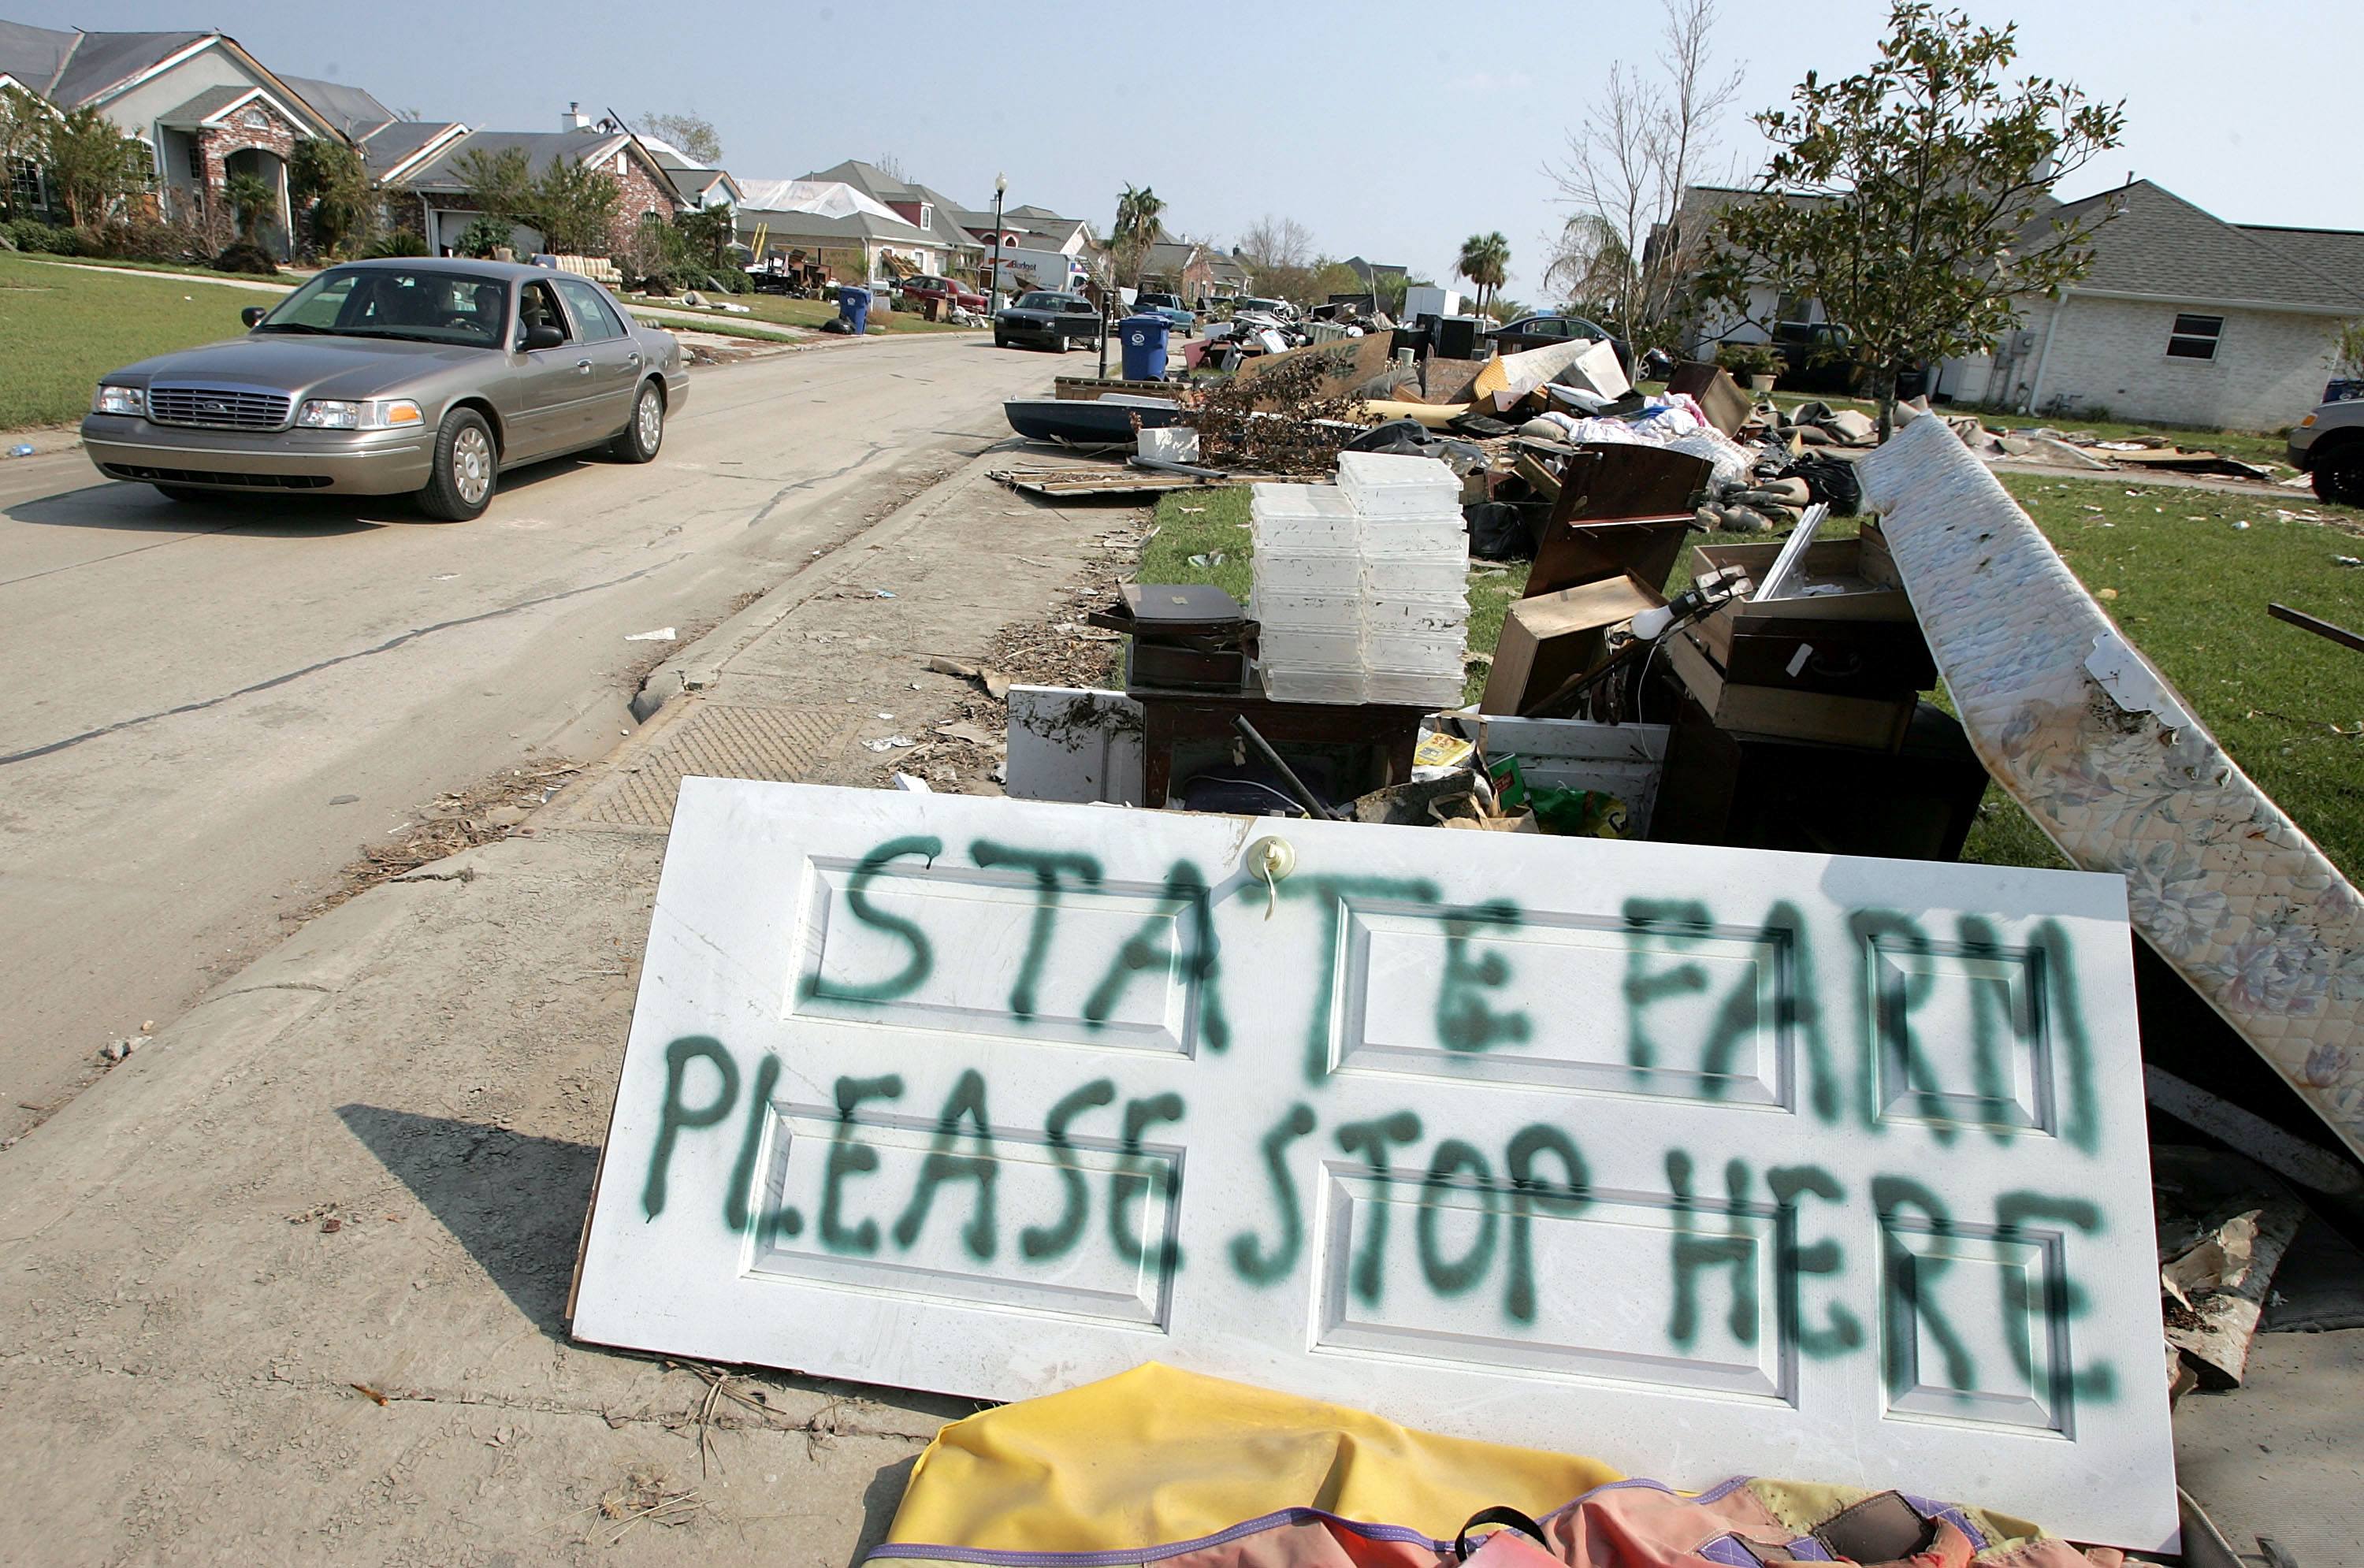 sign that says "state farm please stop here" on a damaged street